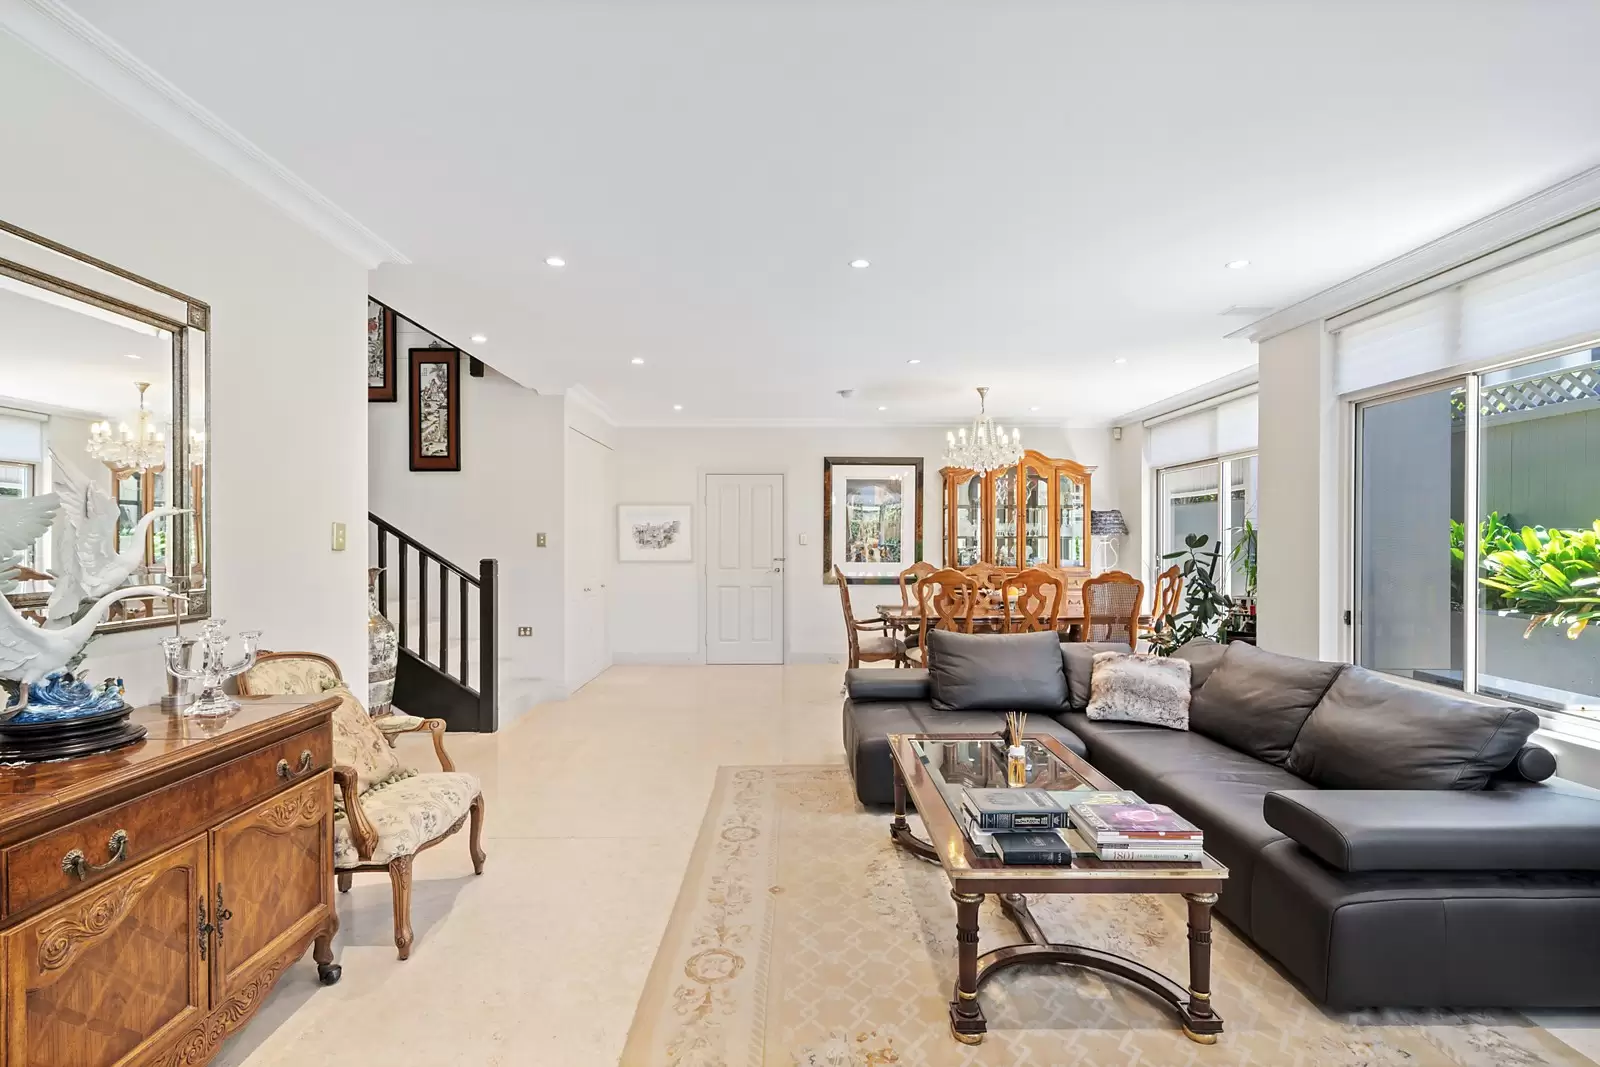 Photo #6: 22/17a Cooper Park Road, Bellevue Hill - Sold by Sydney Sotheby's International Realty